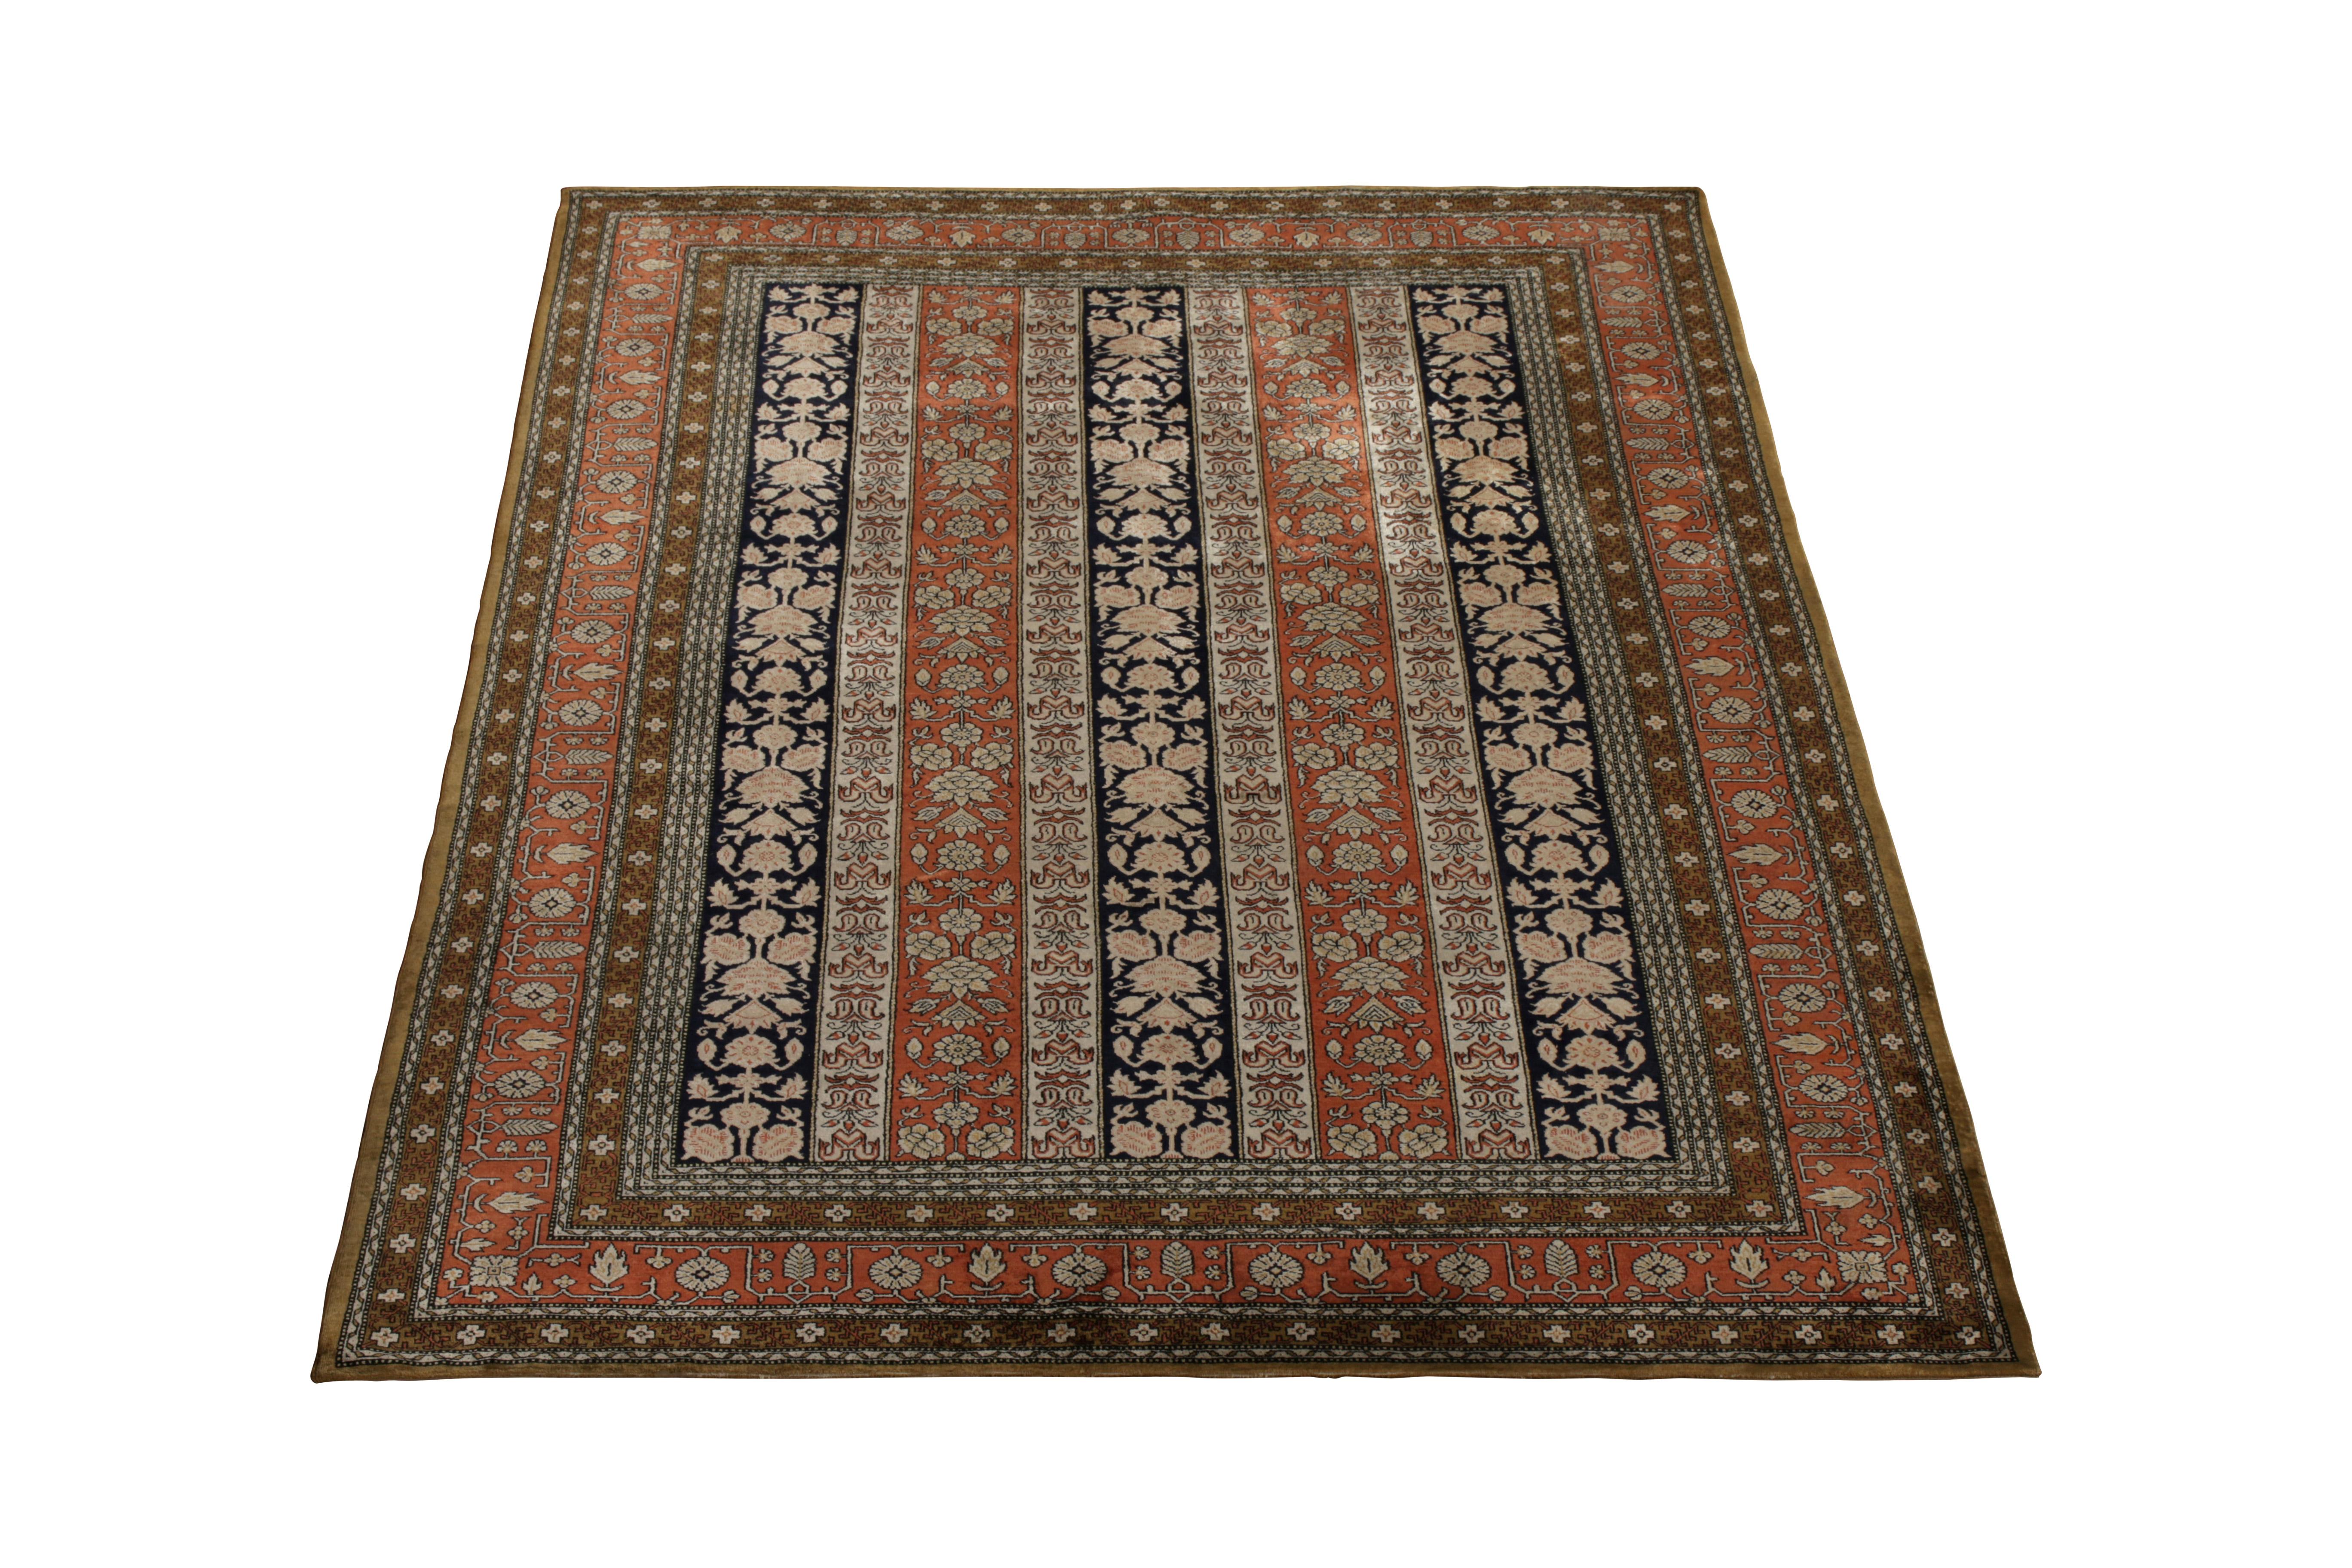 A rare vintage pair of 5x7 Persian Qum rugs, hand-knotted in lustrous silk circa 1950-1960. 

Further on the Design: 

Keen eyes will note bronze and cream tones in the prevalent brick red and black tones these works enjoy. Meticulous detail,